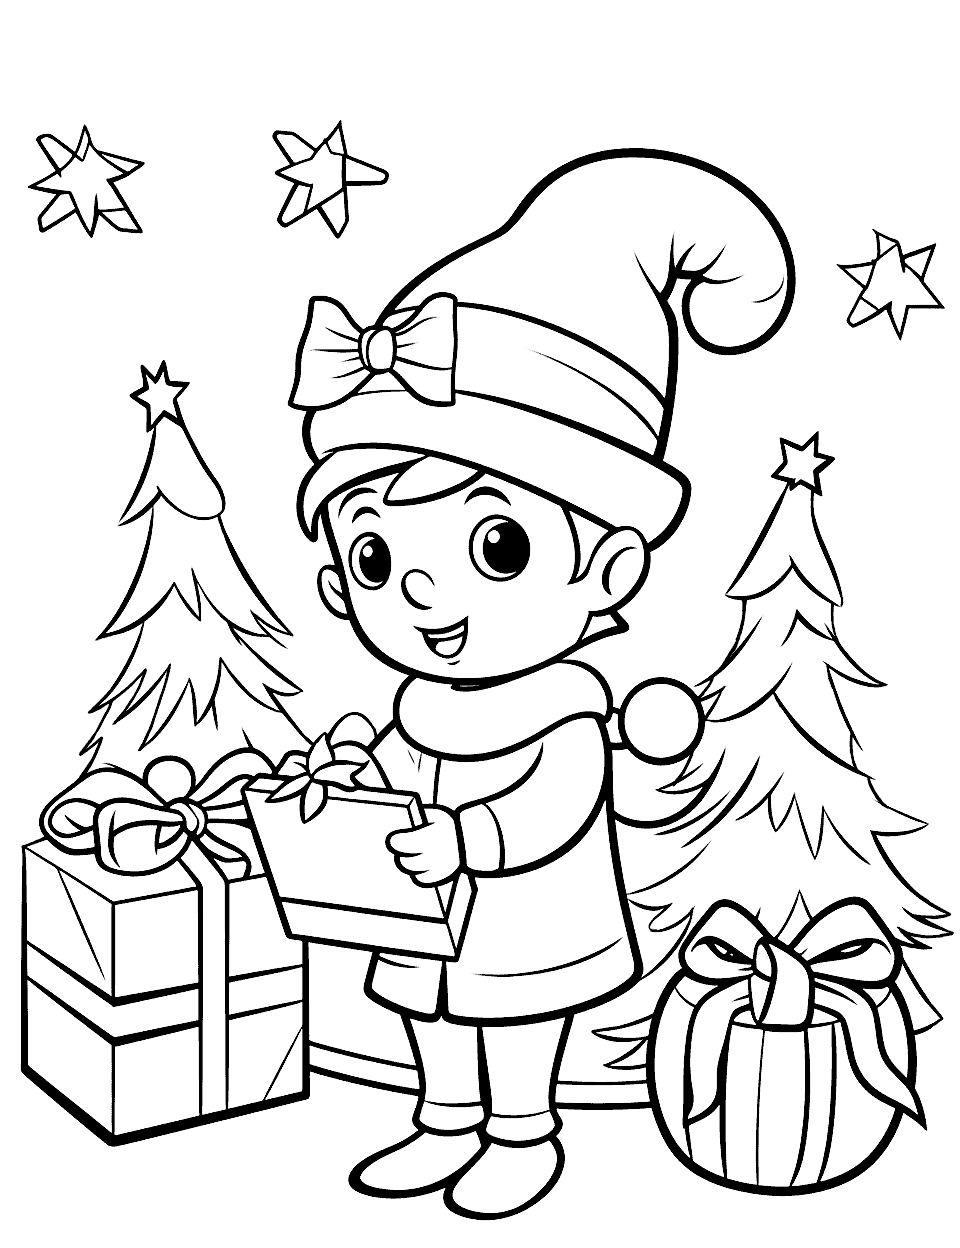 100 Christmas Coloring Pages: Free Printable Sheets - Free Full Size Printable Christmas Coloring Pages